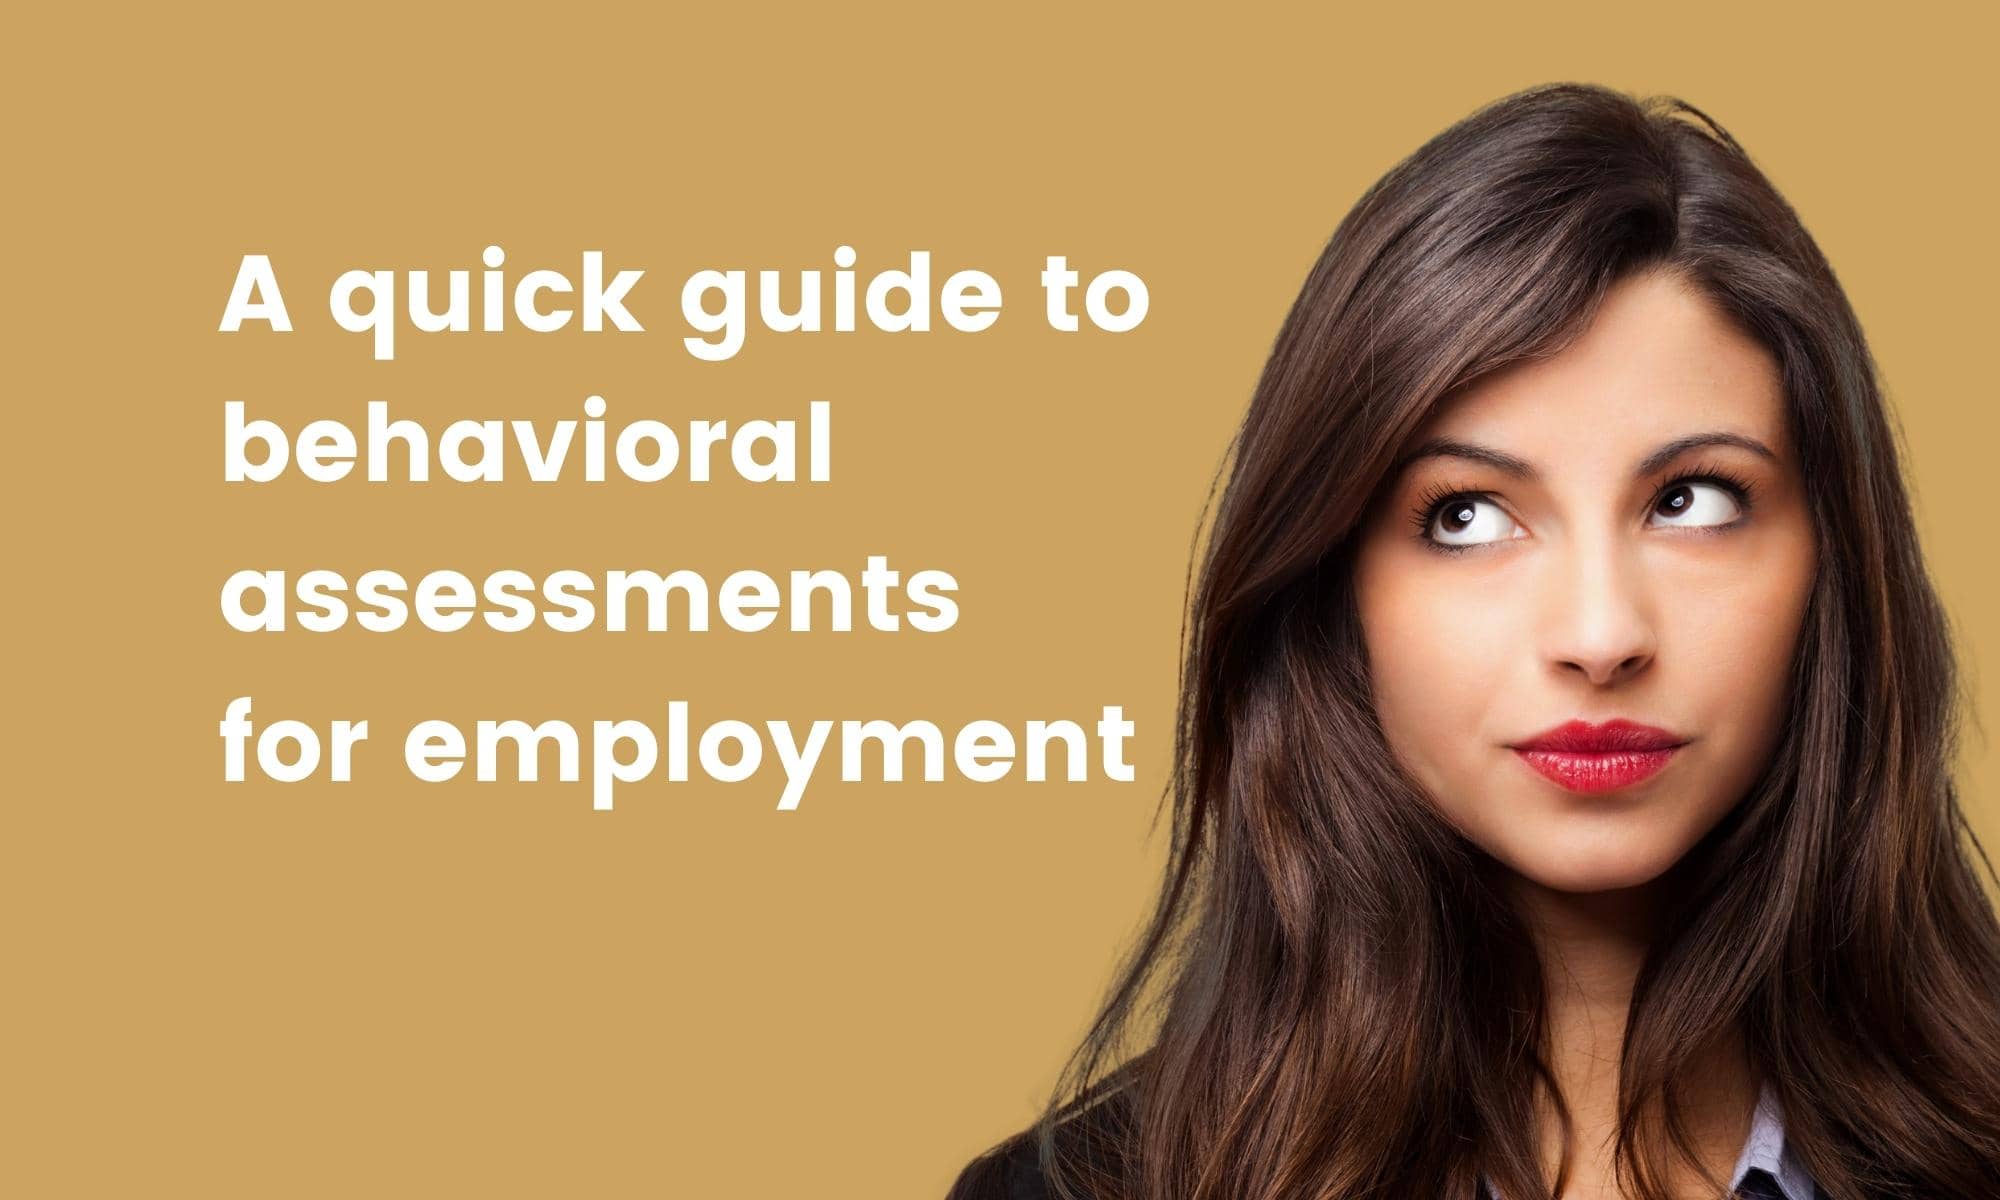 A quick guide to behavioral assessments for employment feature image